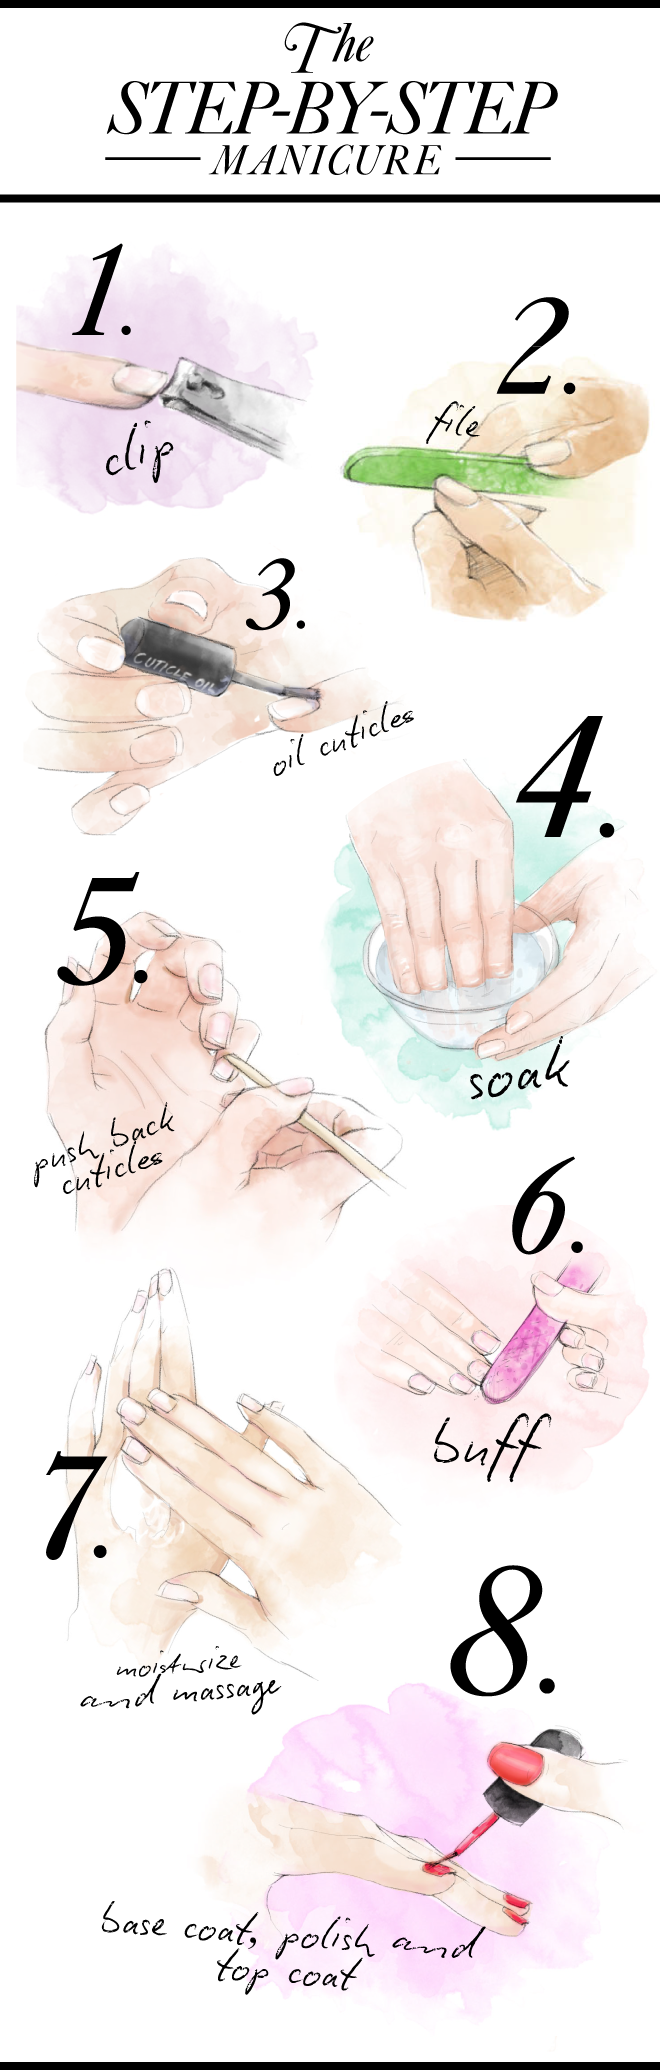 The step-by-step manicure